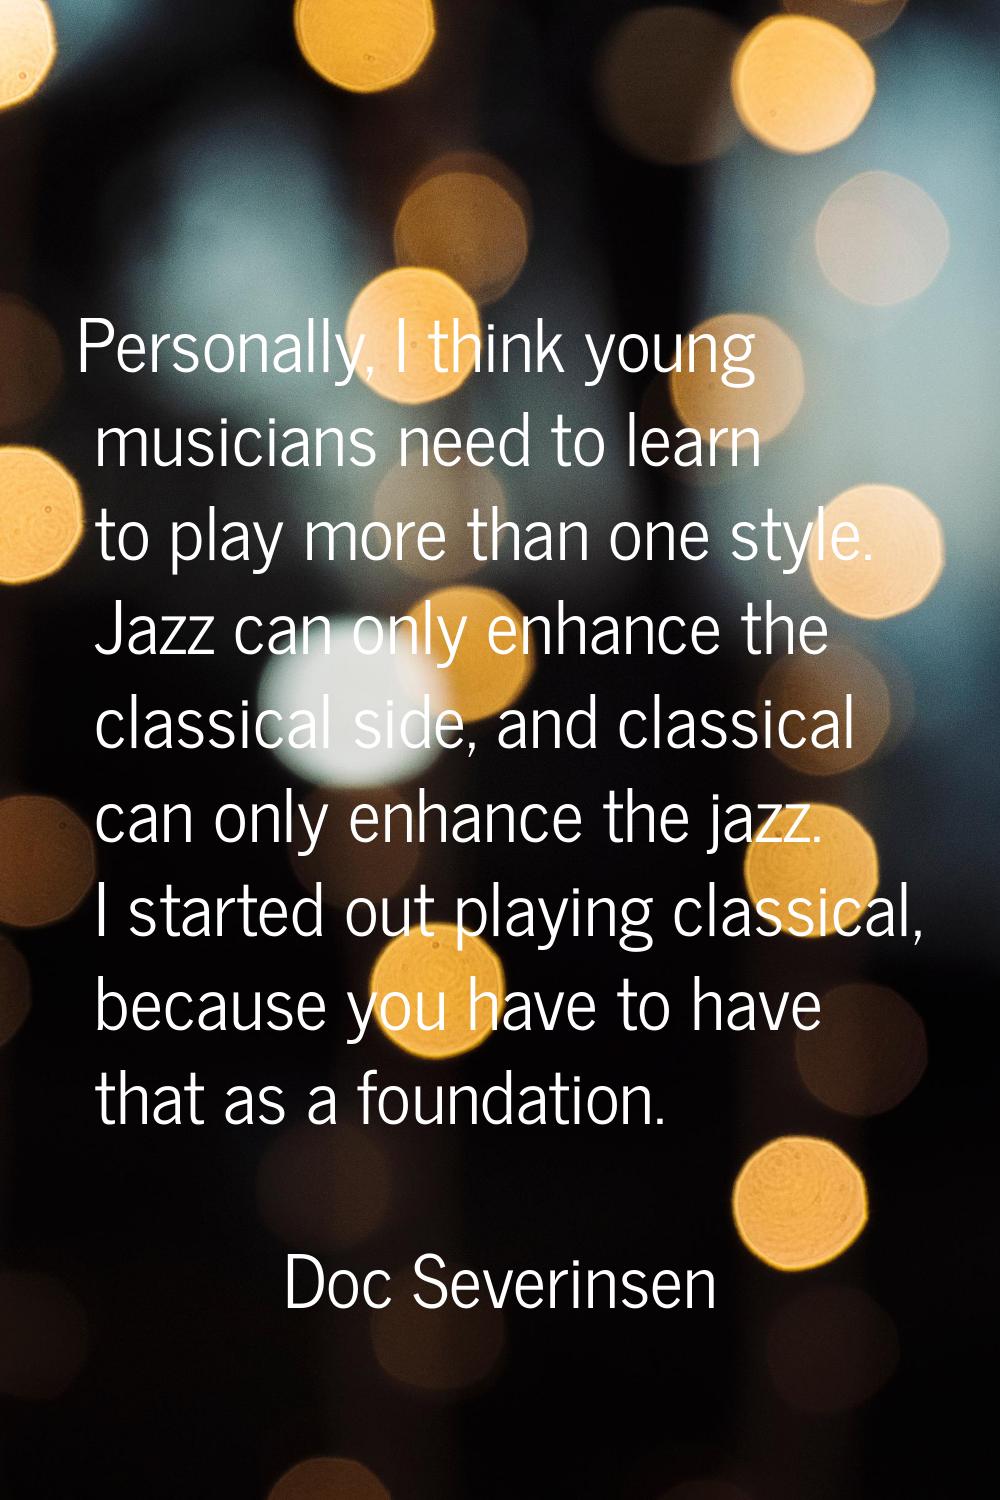 Personally, I think young musicians need to learn to play more than one style. Jazz can only enhanc